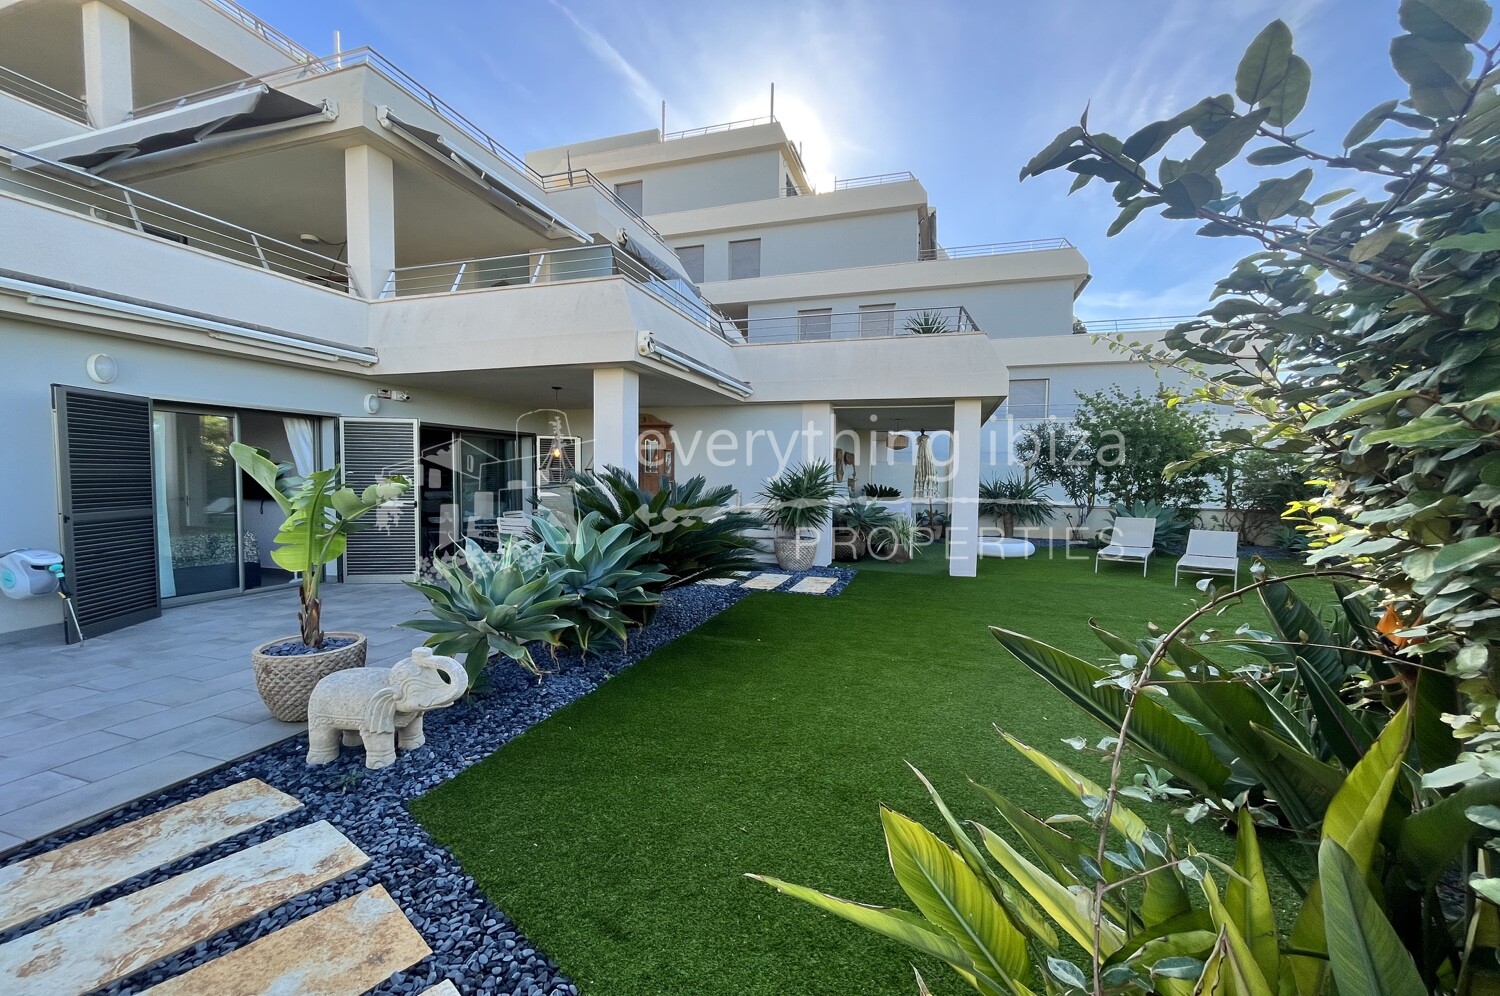 Magnificent Property of the Finest Quality & Close to the Beach, ref. 1510, for sale in Ibiza by everything ibiza Properties